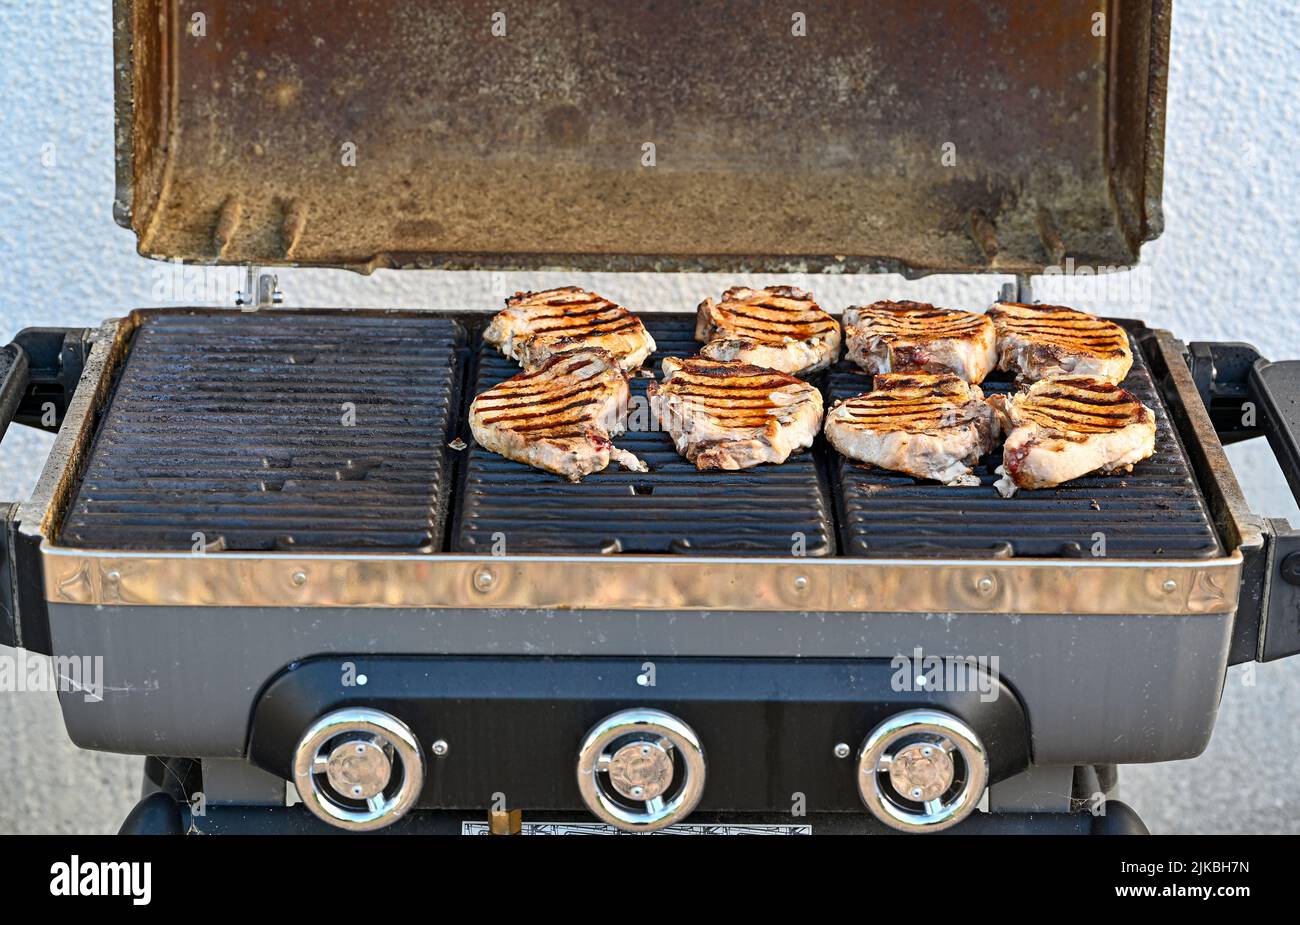 pork chop on grill an evening in july Stock Photo